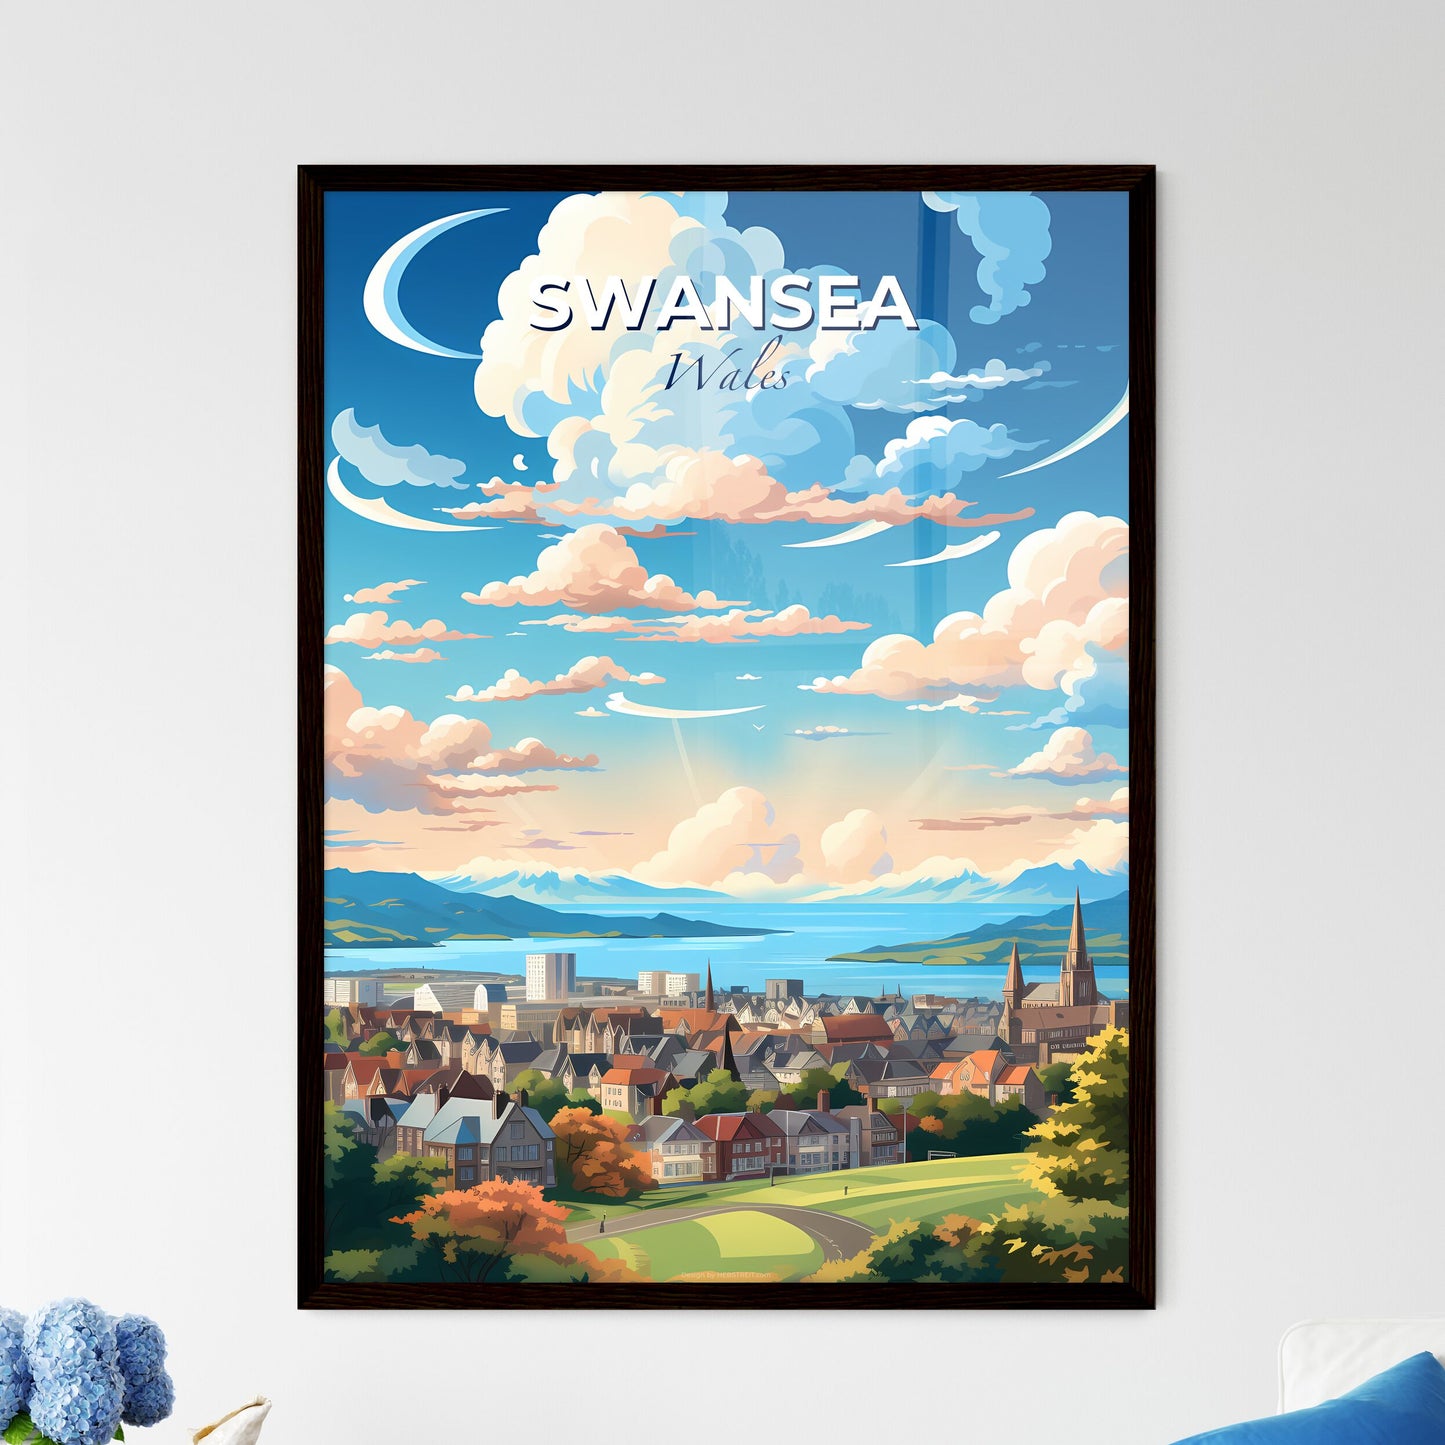 Swansea Wales Skyline - A City With Trees And Mountains In The Background - Customizable Travel Gift Default Title